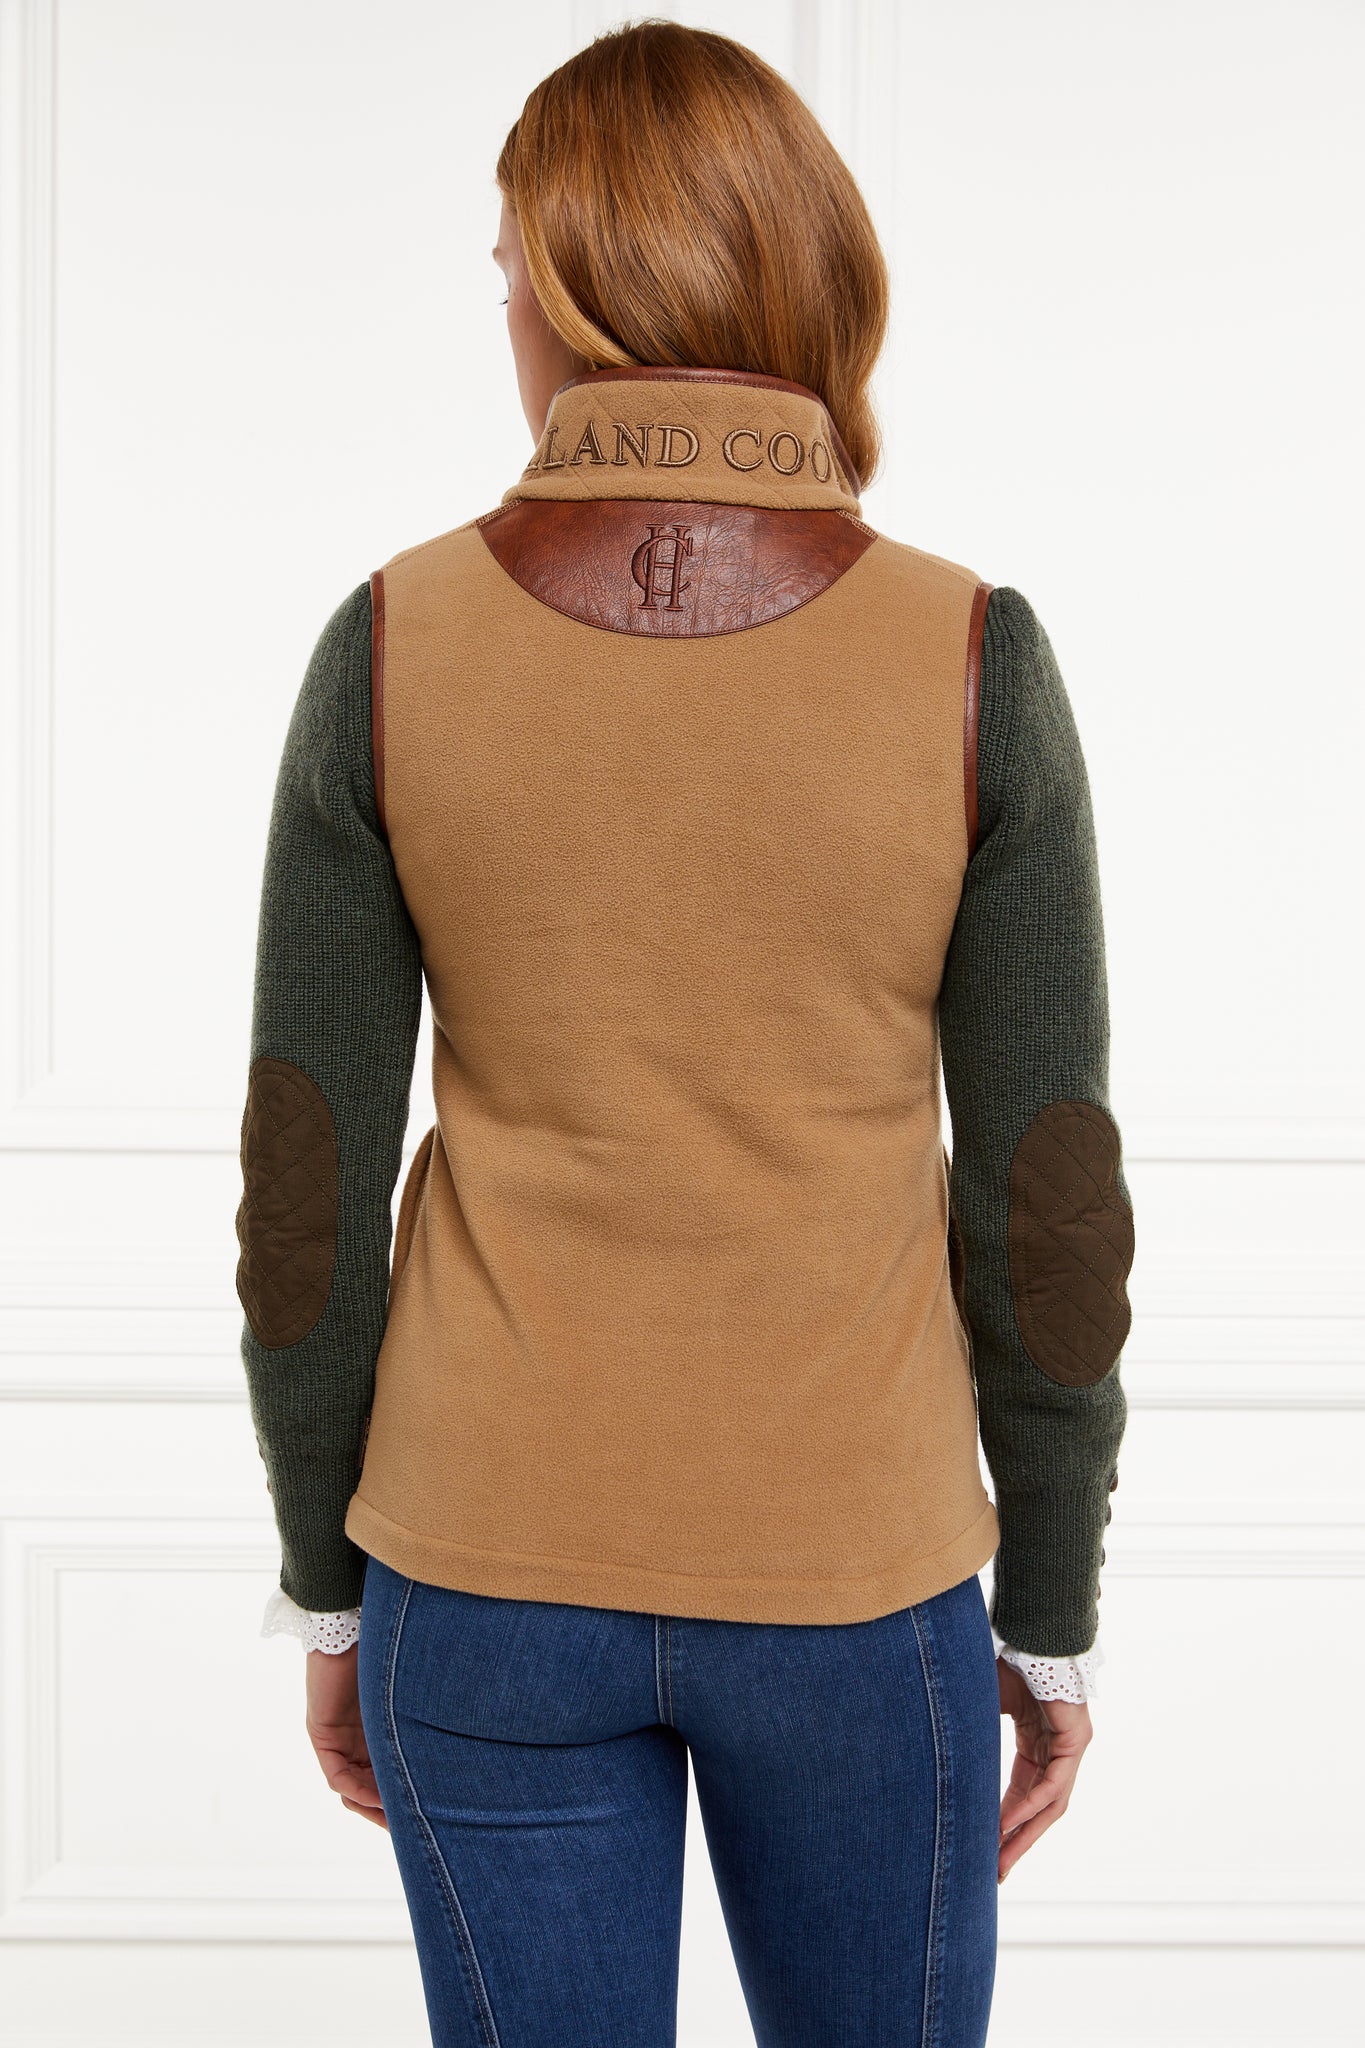 womens fleece gilet in light brown with dark brown leather piping around armholes neckline and down the front zip fastening worn with a dark green knitted sweatshirt and dark denim jeans